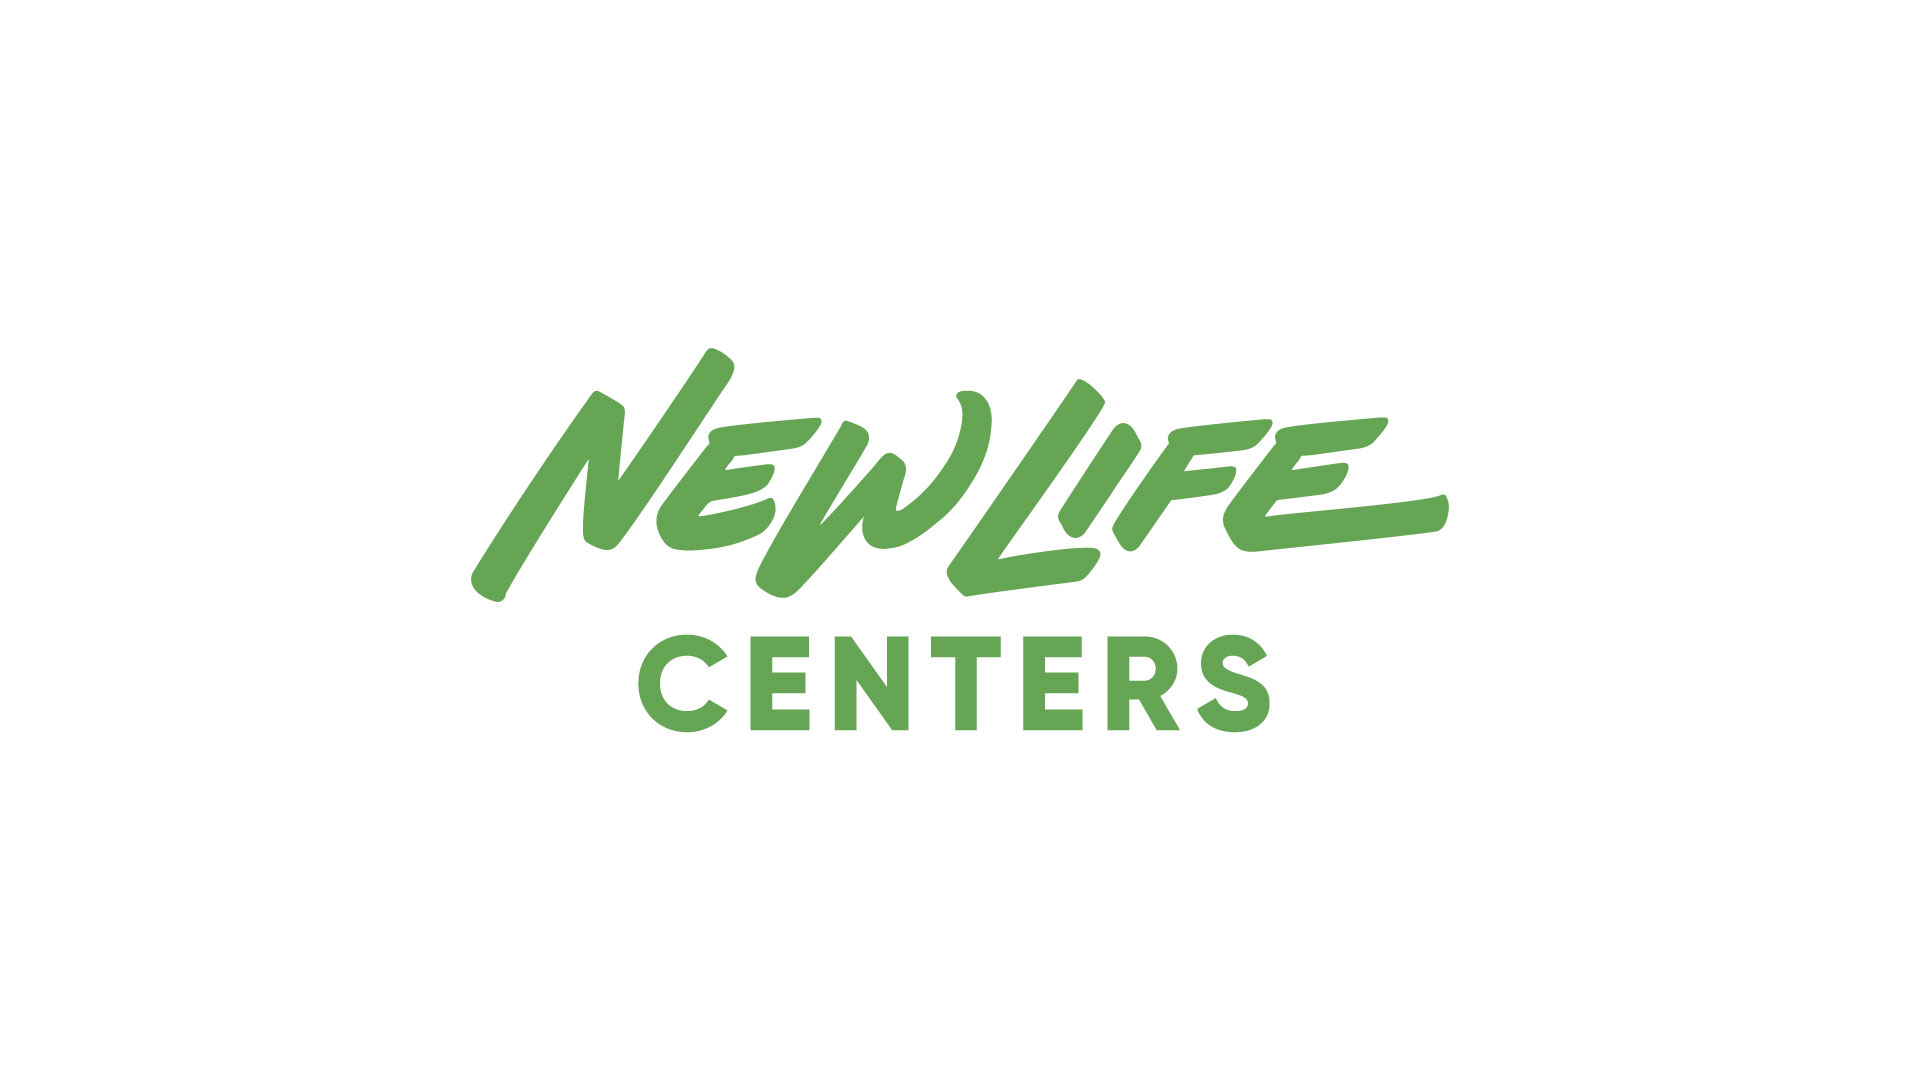 New Life Centers